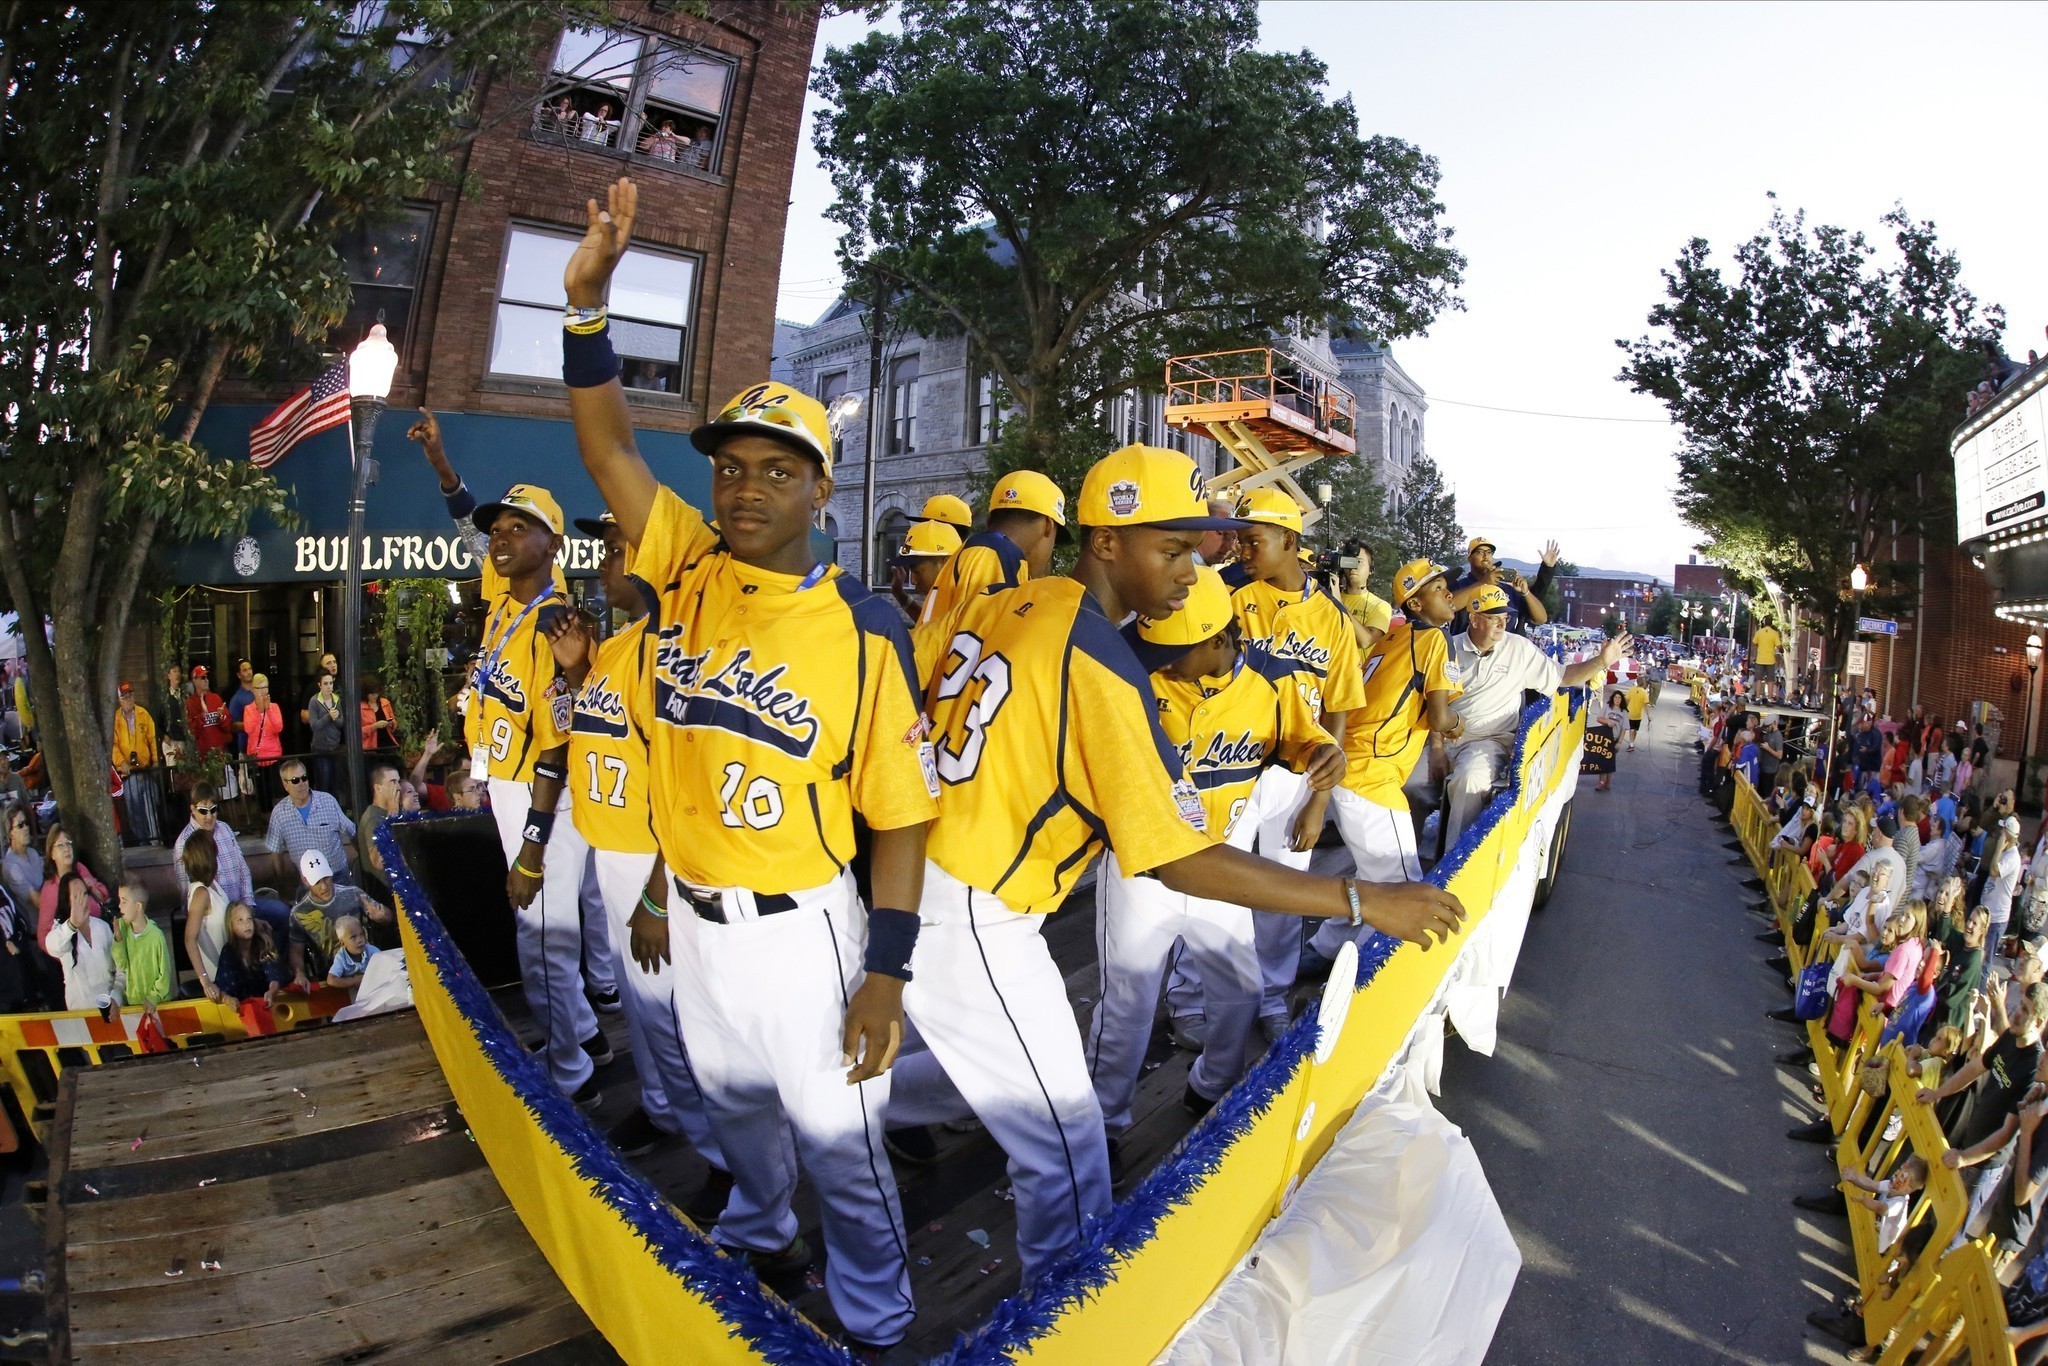 Jackie Robinson West to leave Little League because of 'disrespect'